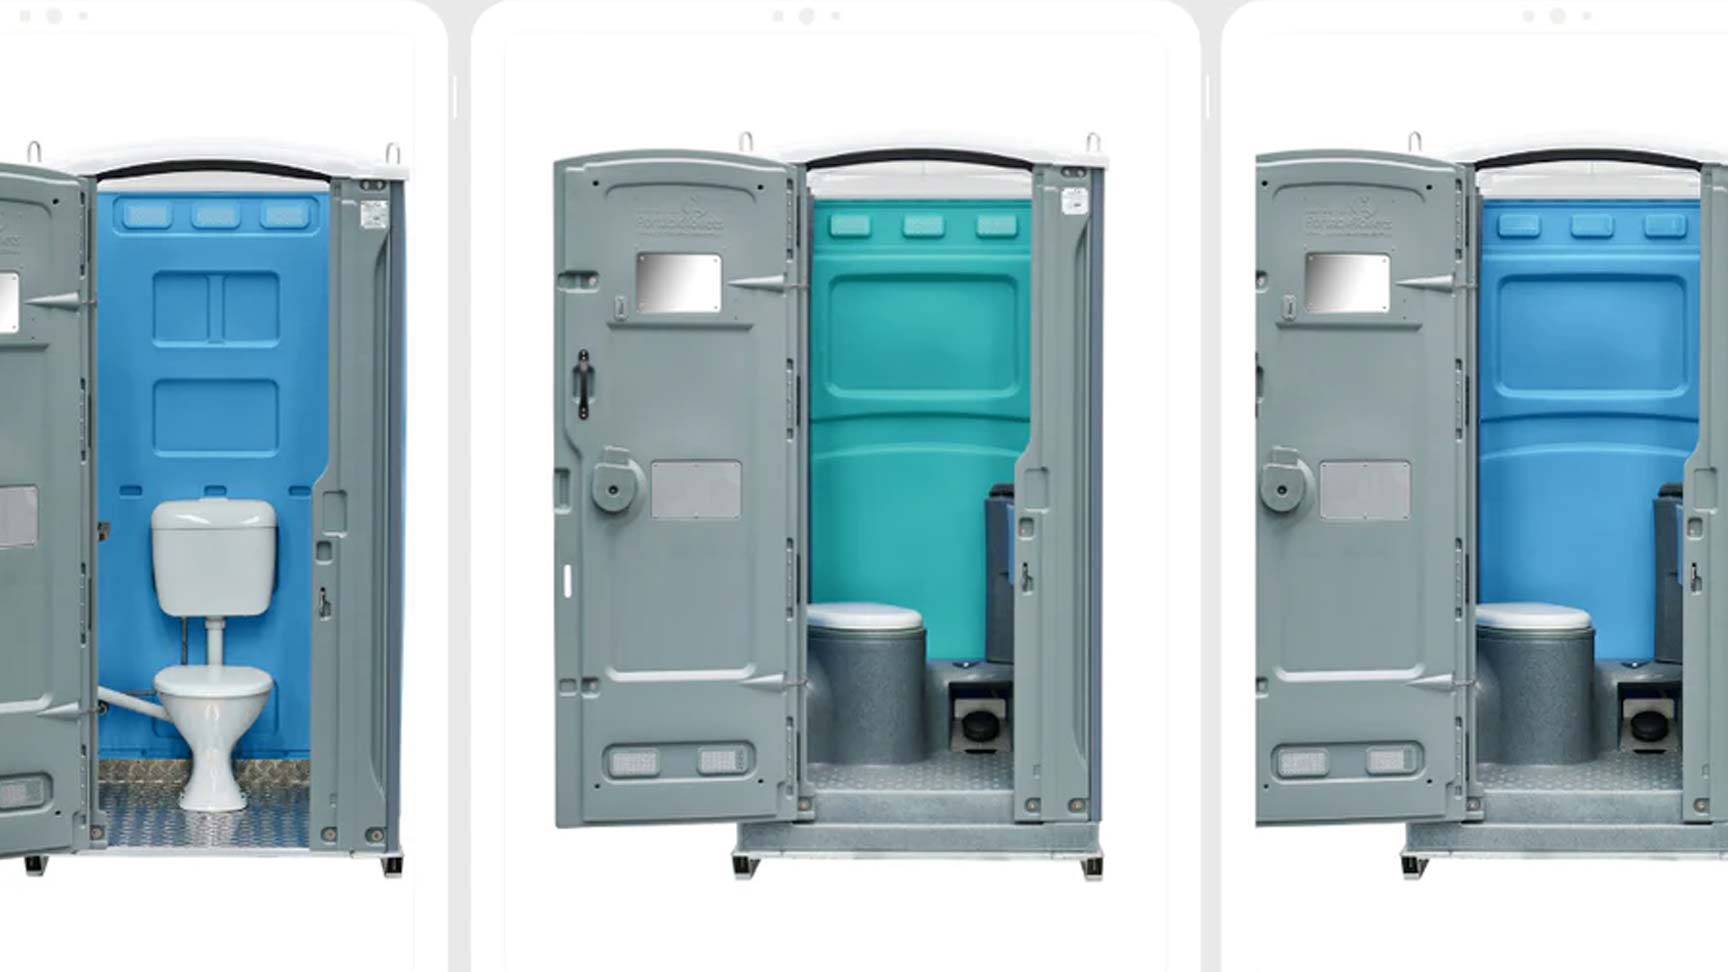 Portable Toilet - Why Cleaning and Sanitation is Important for You